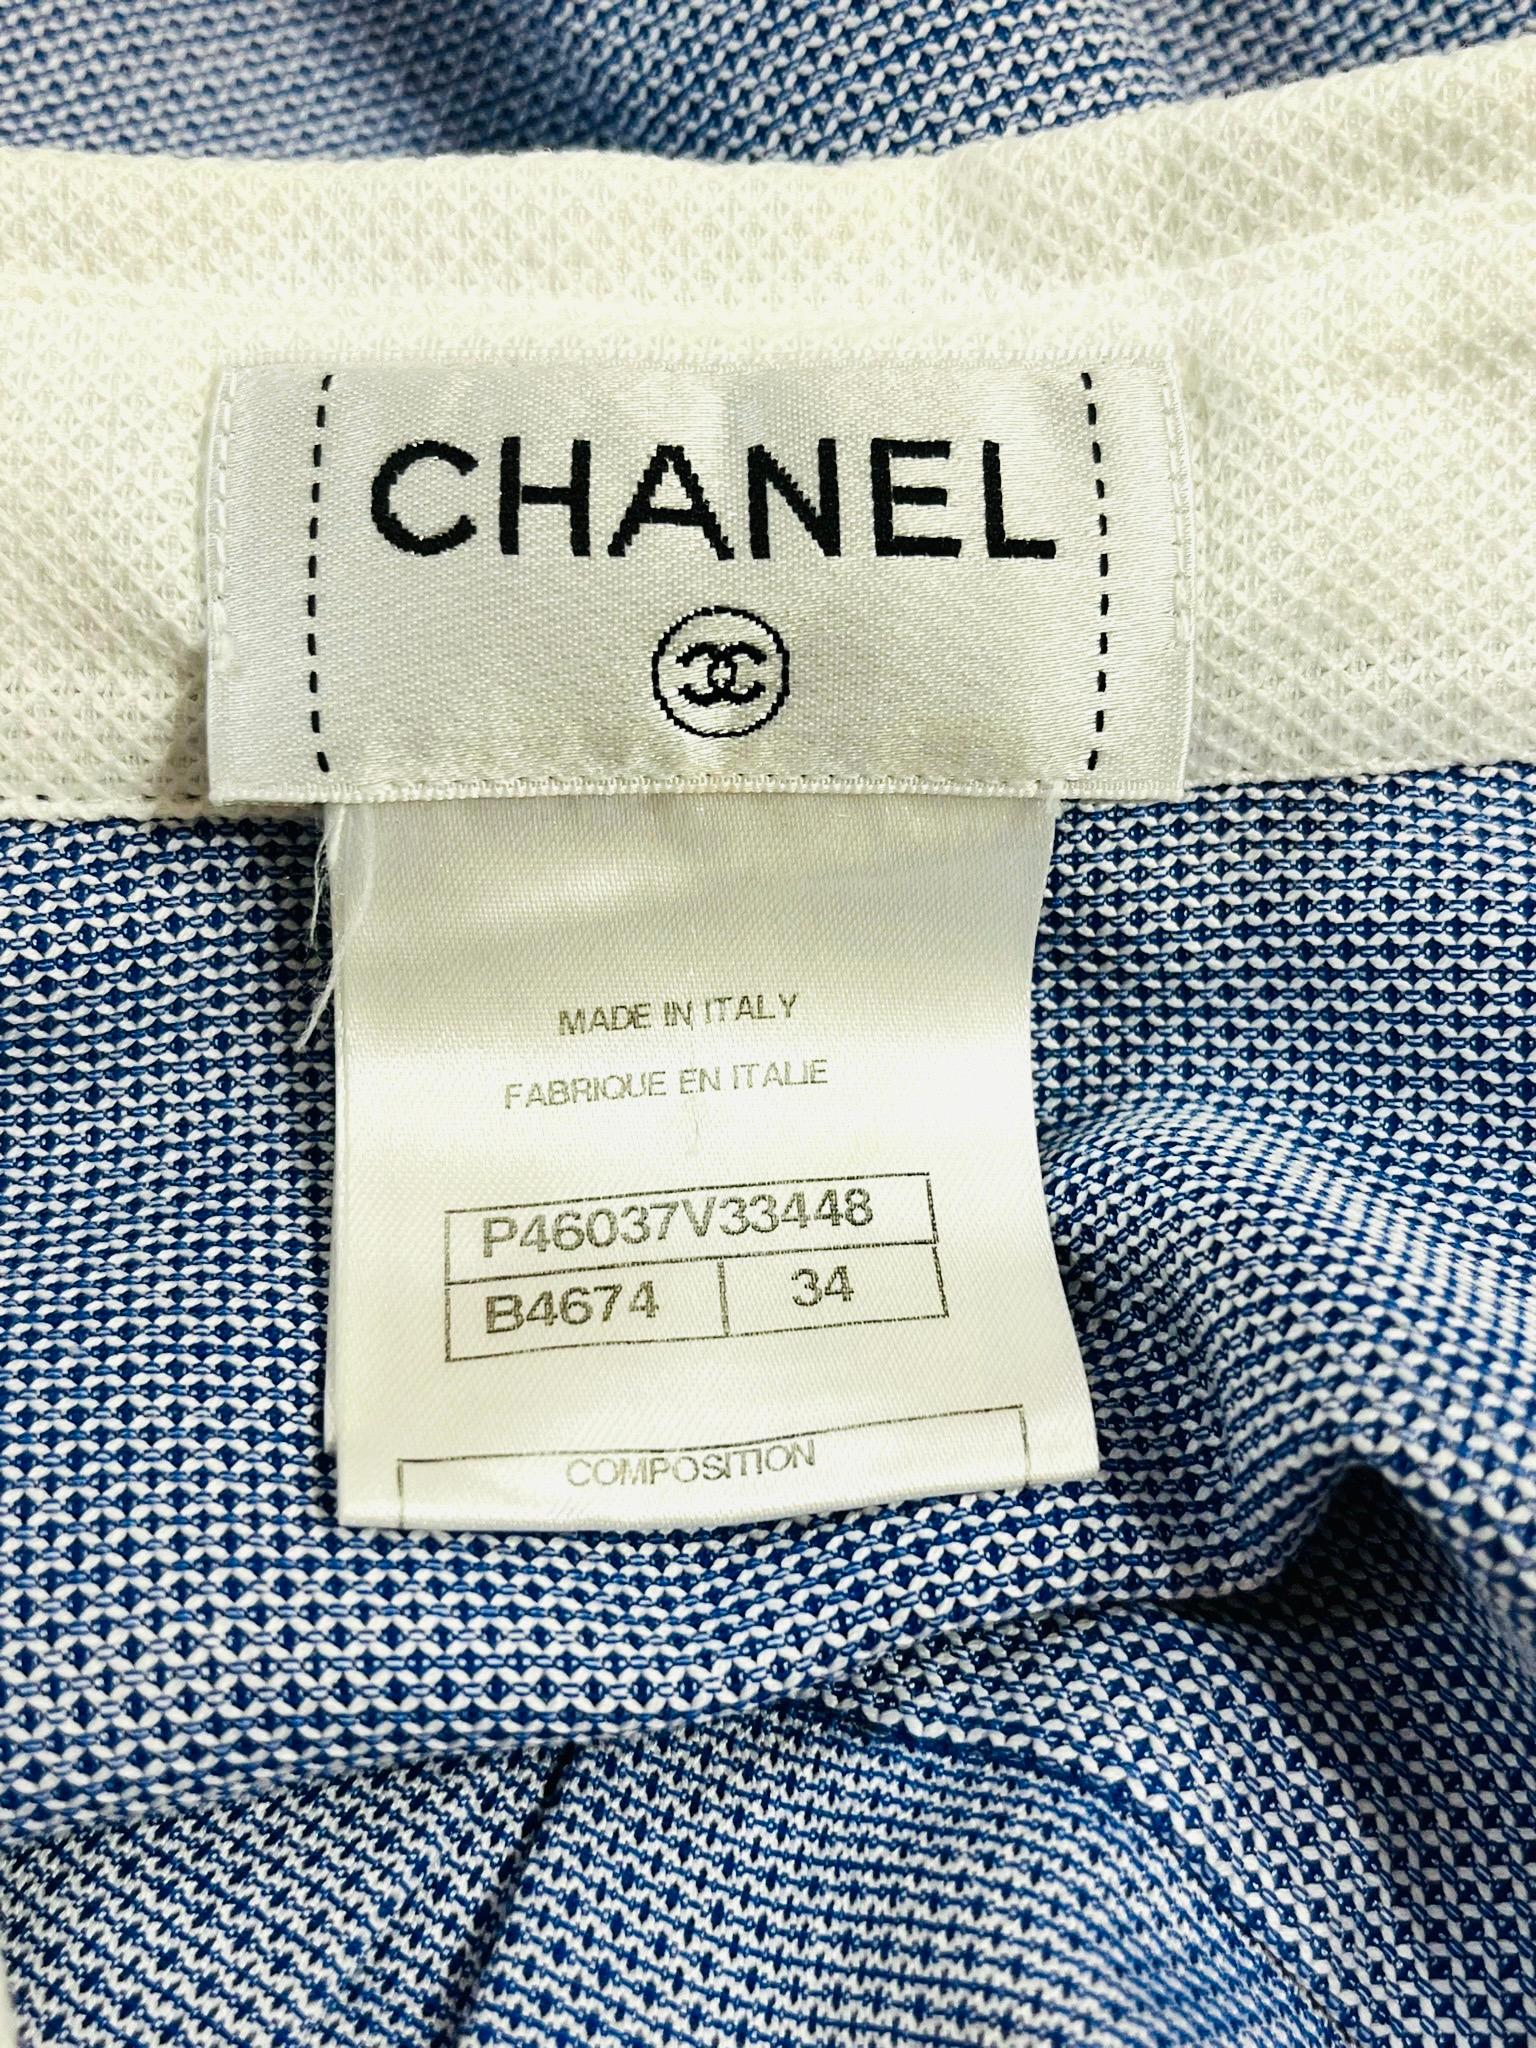 Chanel Textured Cotton Shirt For Sale 2